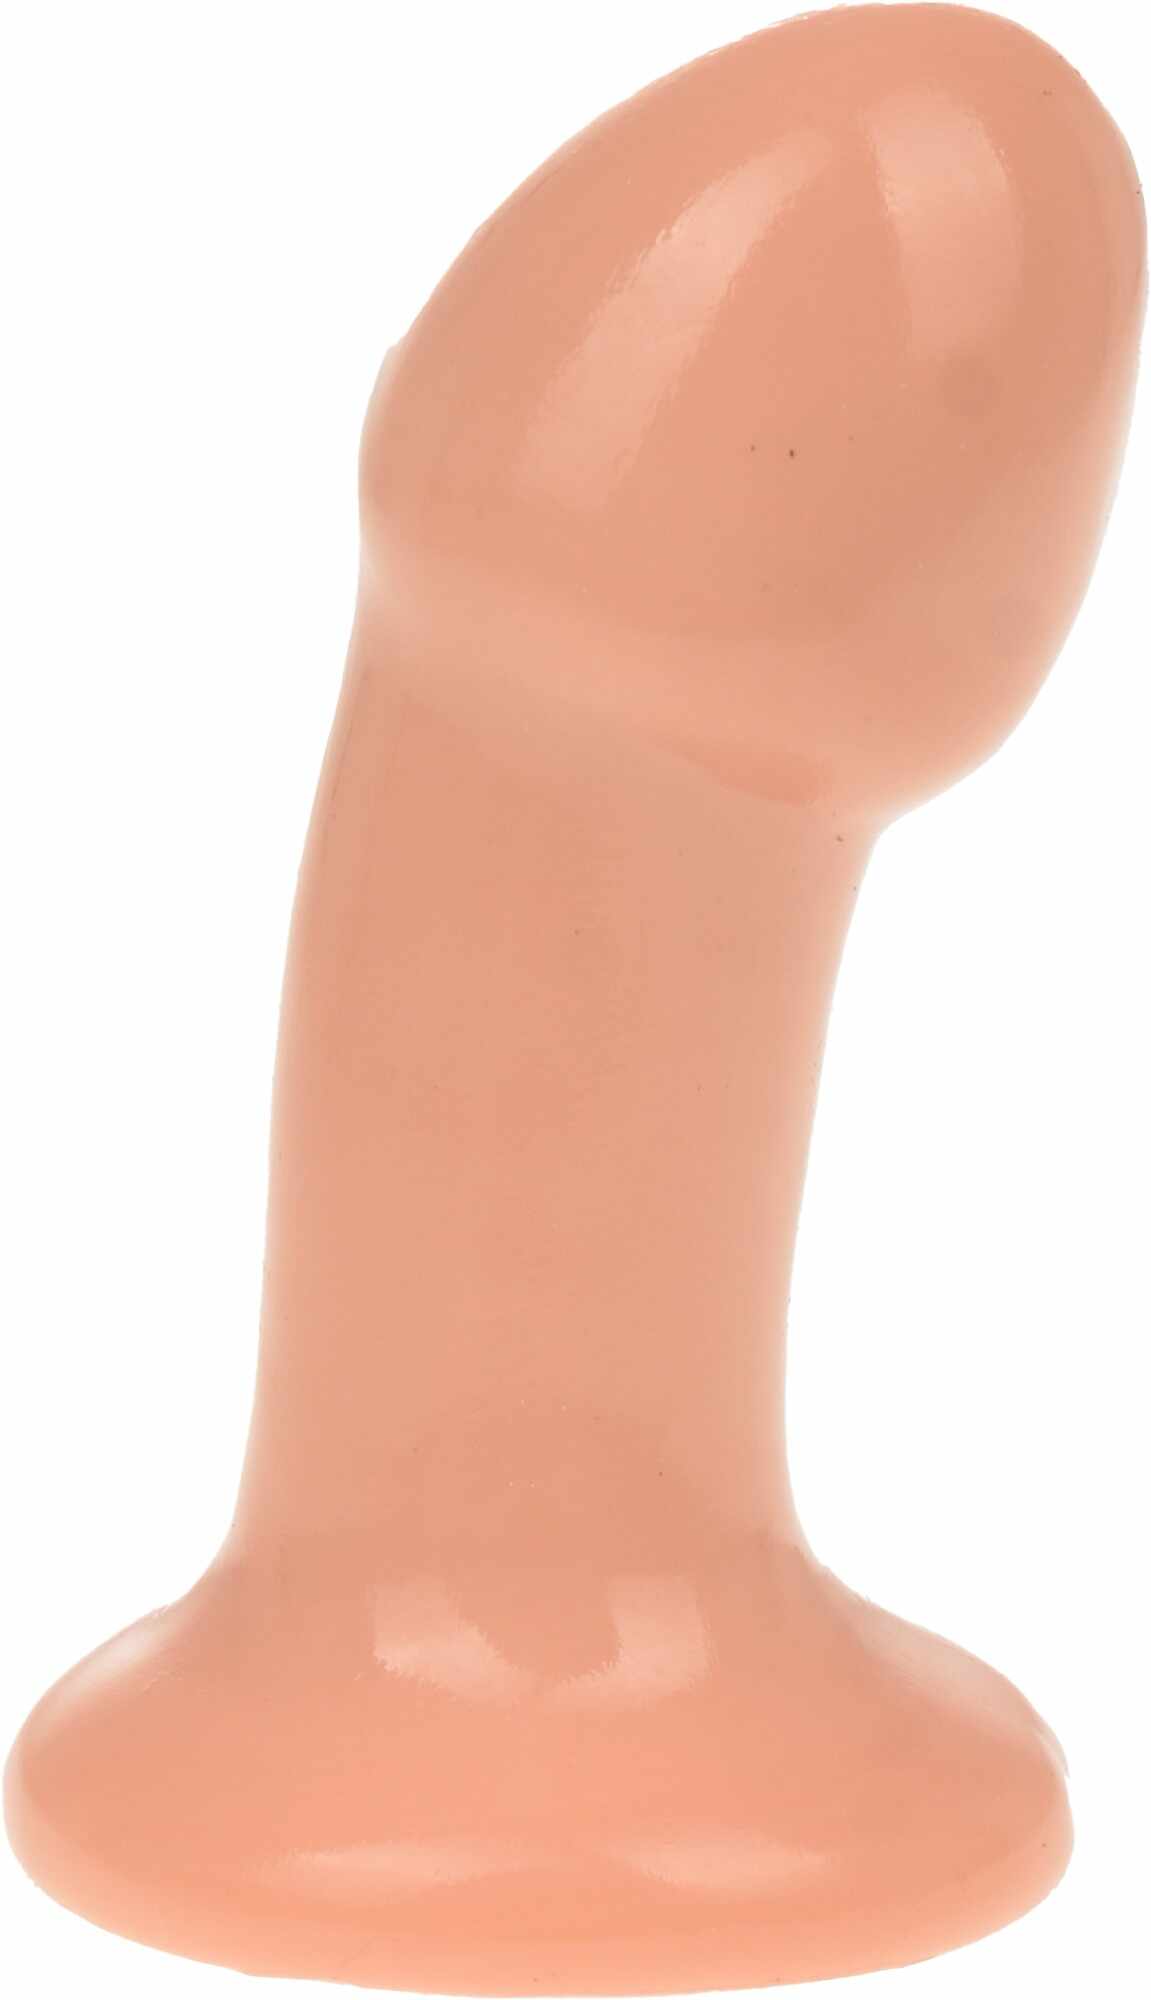 Dop Anal Thor Ventuza Puternica PVC Natural 10.5 cm Guilty Toy